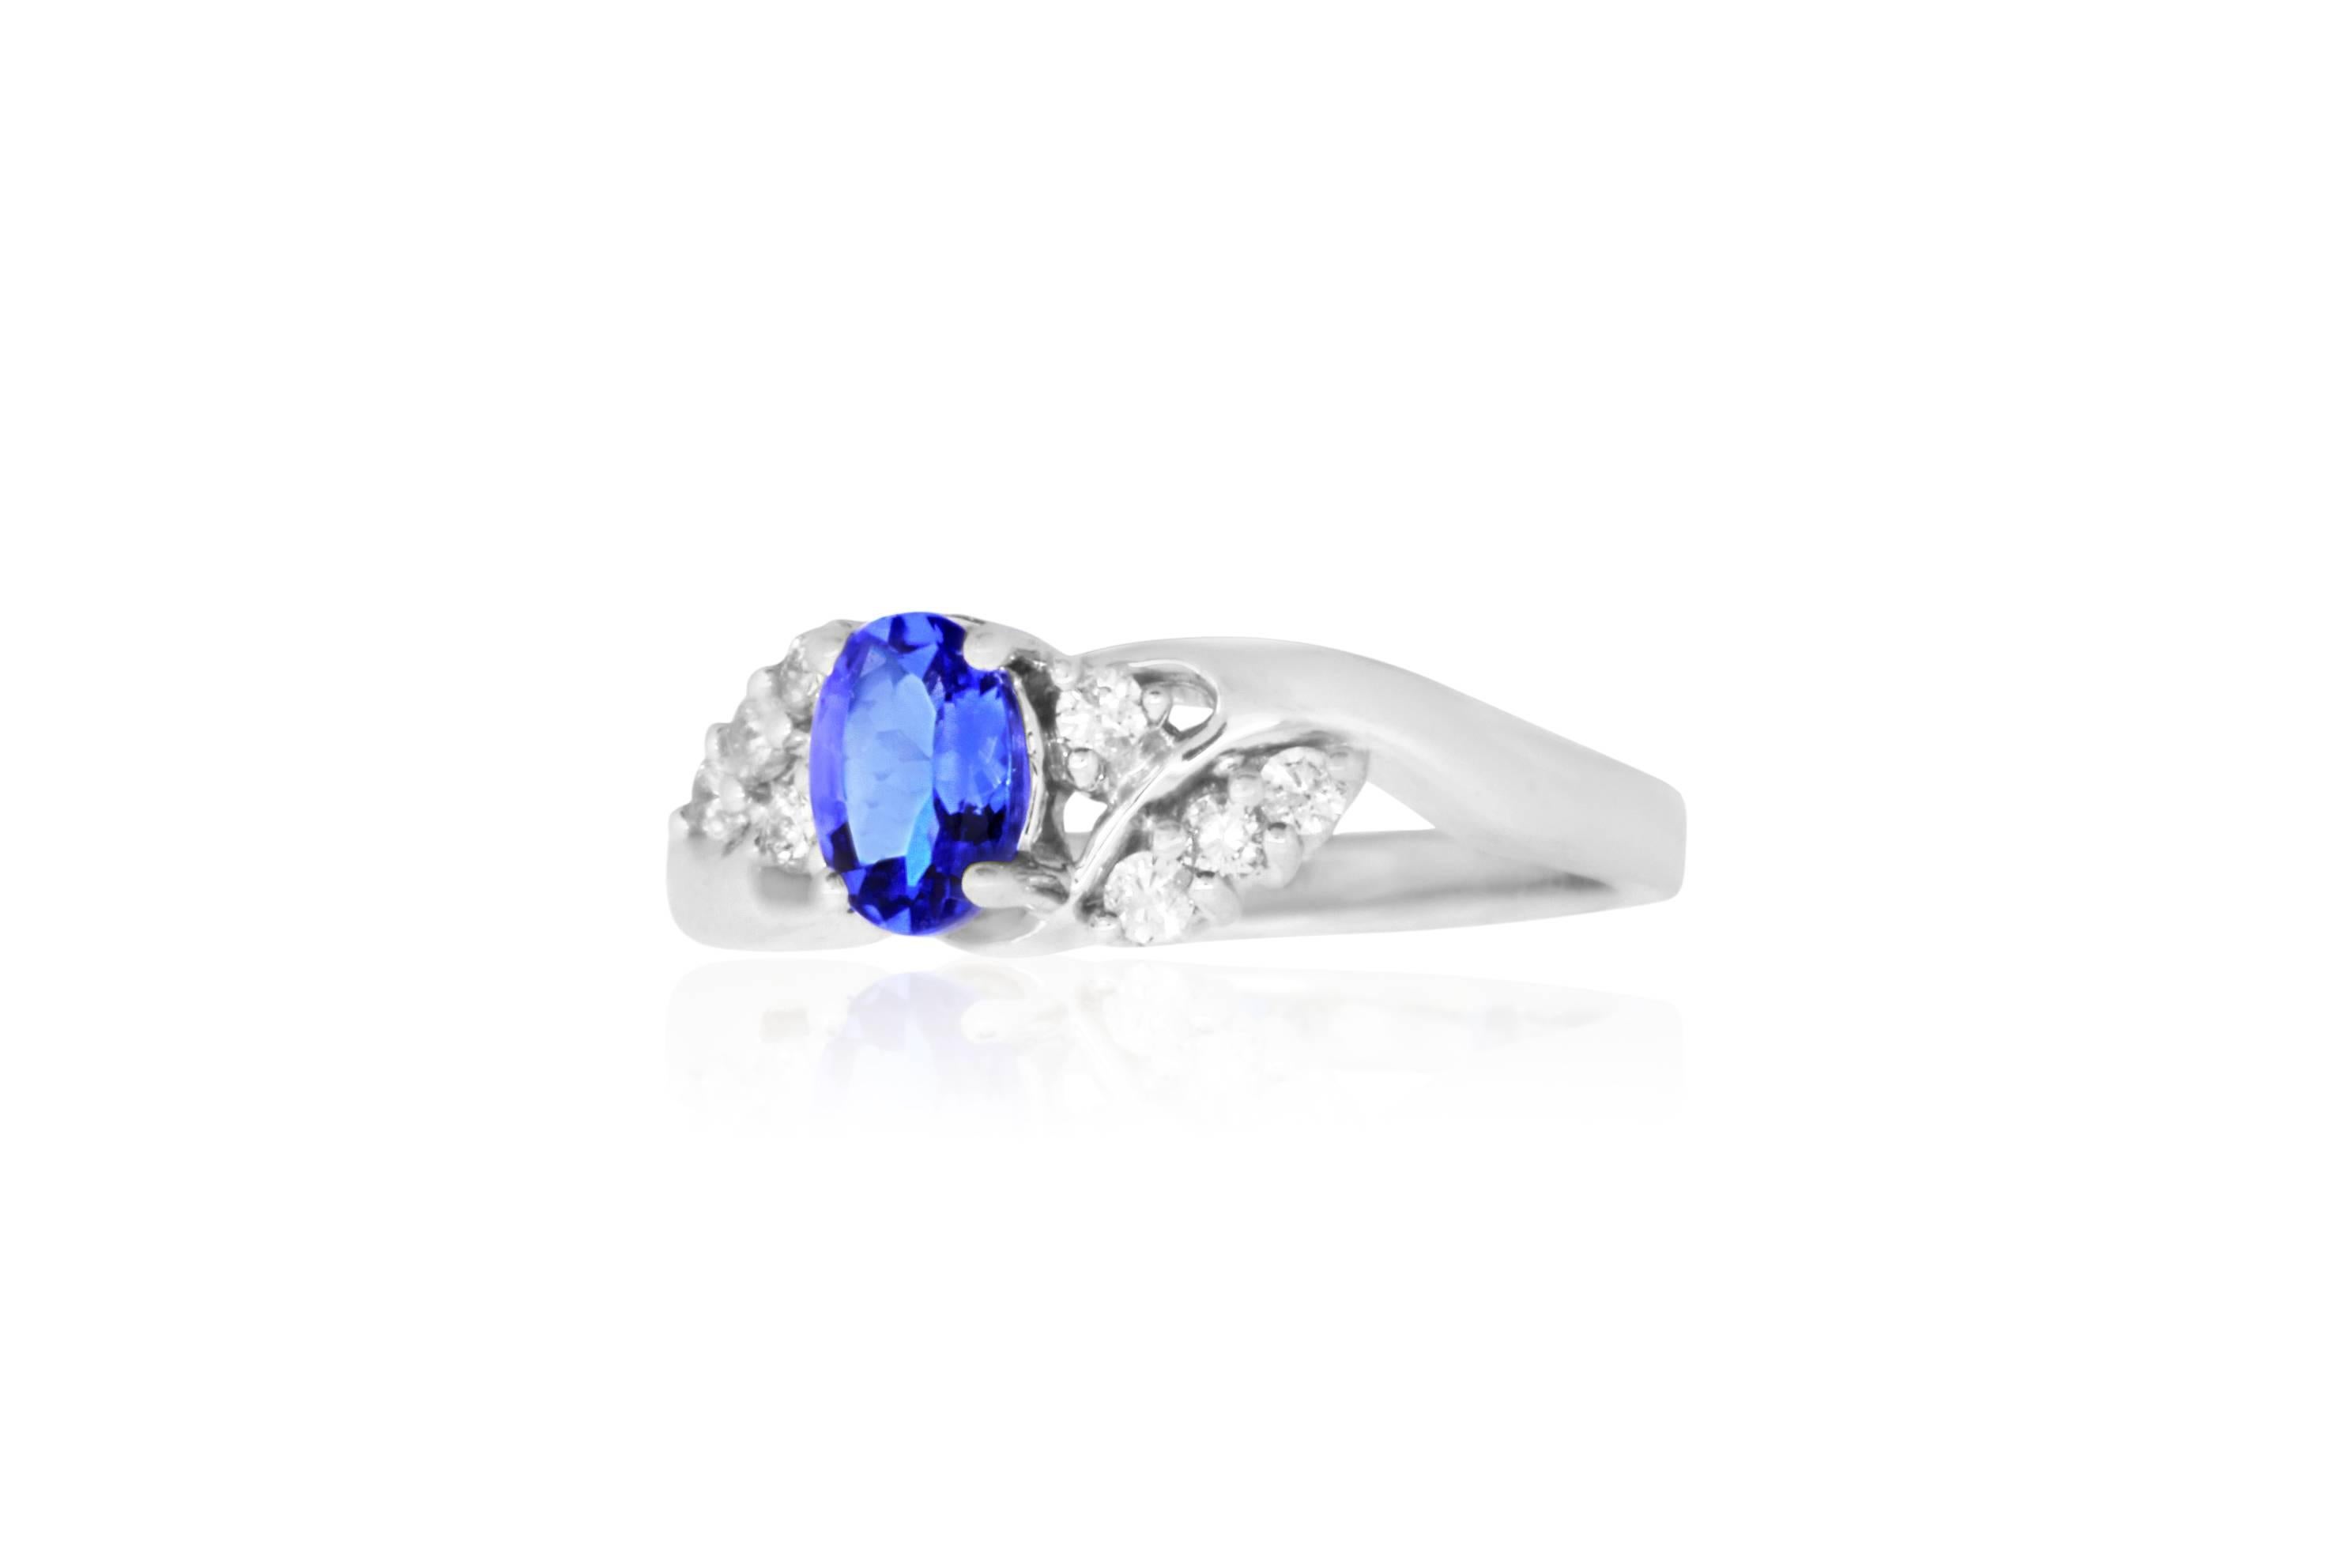 With a beautiful & chic design, you will fall in love with this 0.65 carat Oval shaped Tanzanite. Framed with 8 white diamonds totaling 0.15 carats, this bold blue ring is perfect for color jewelry lovers everywhere. 

Material: 14k White